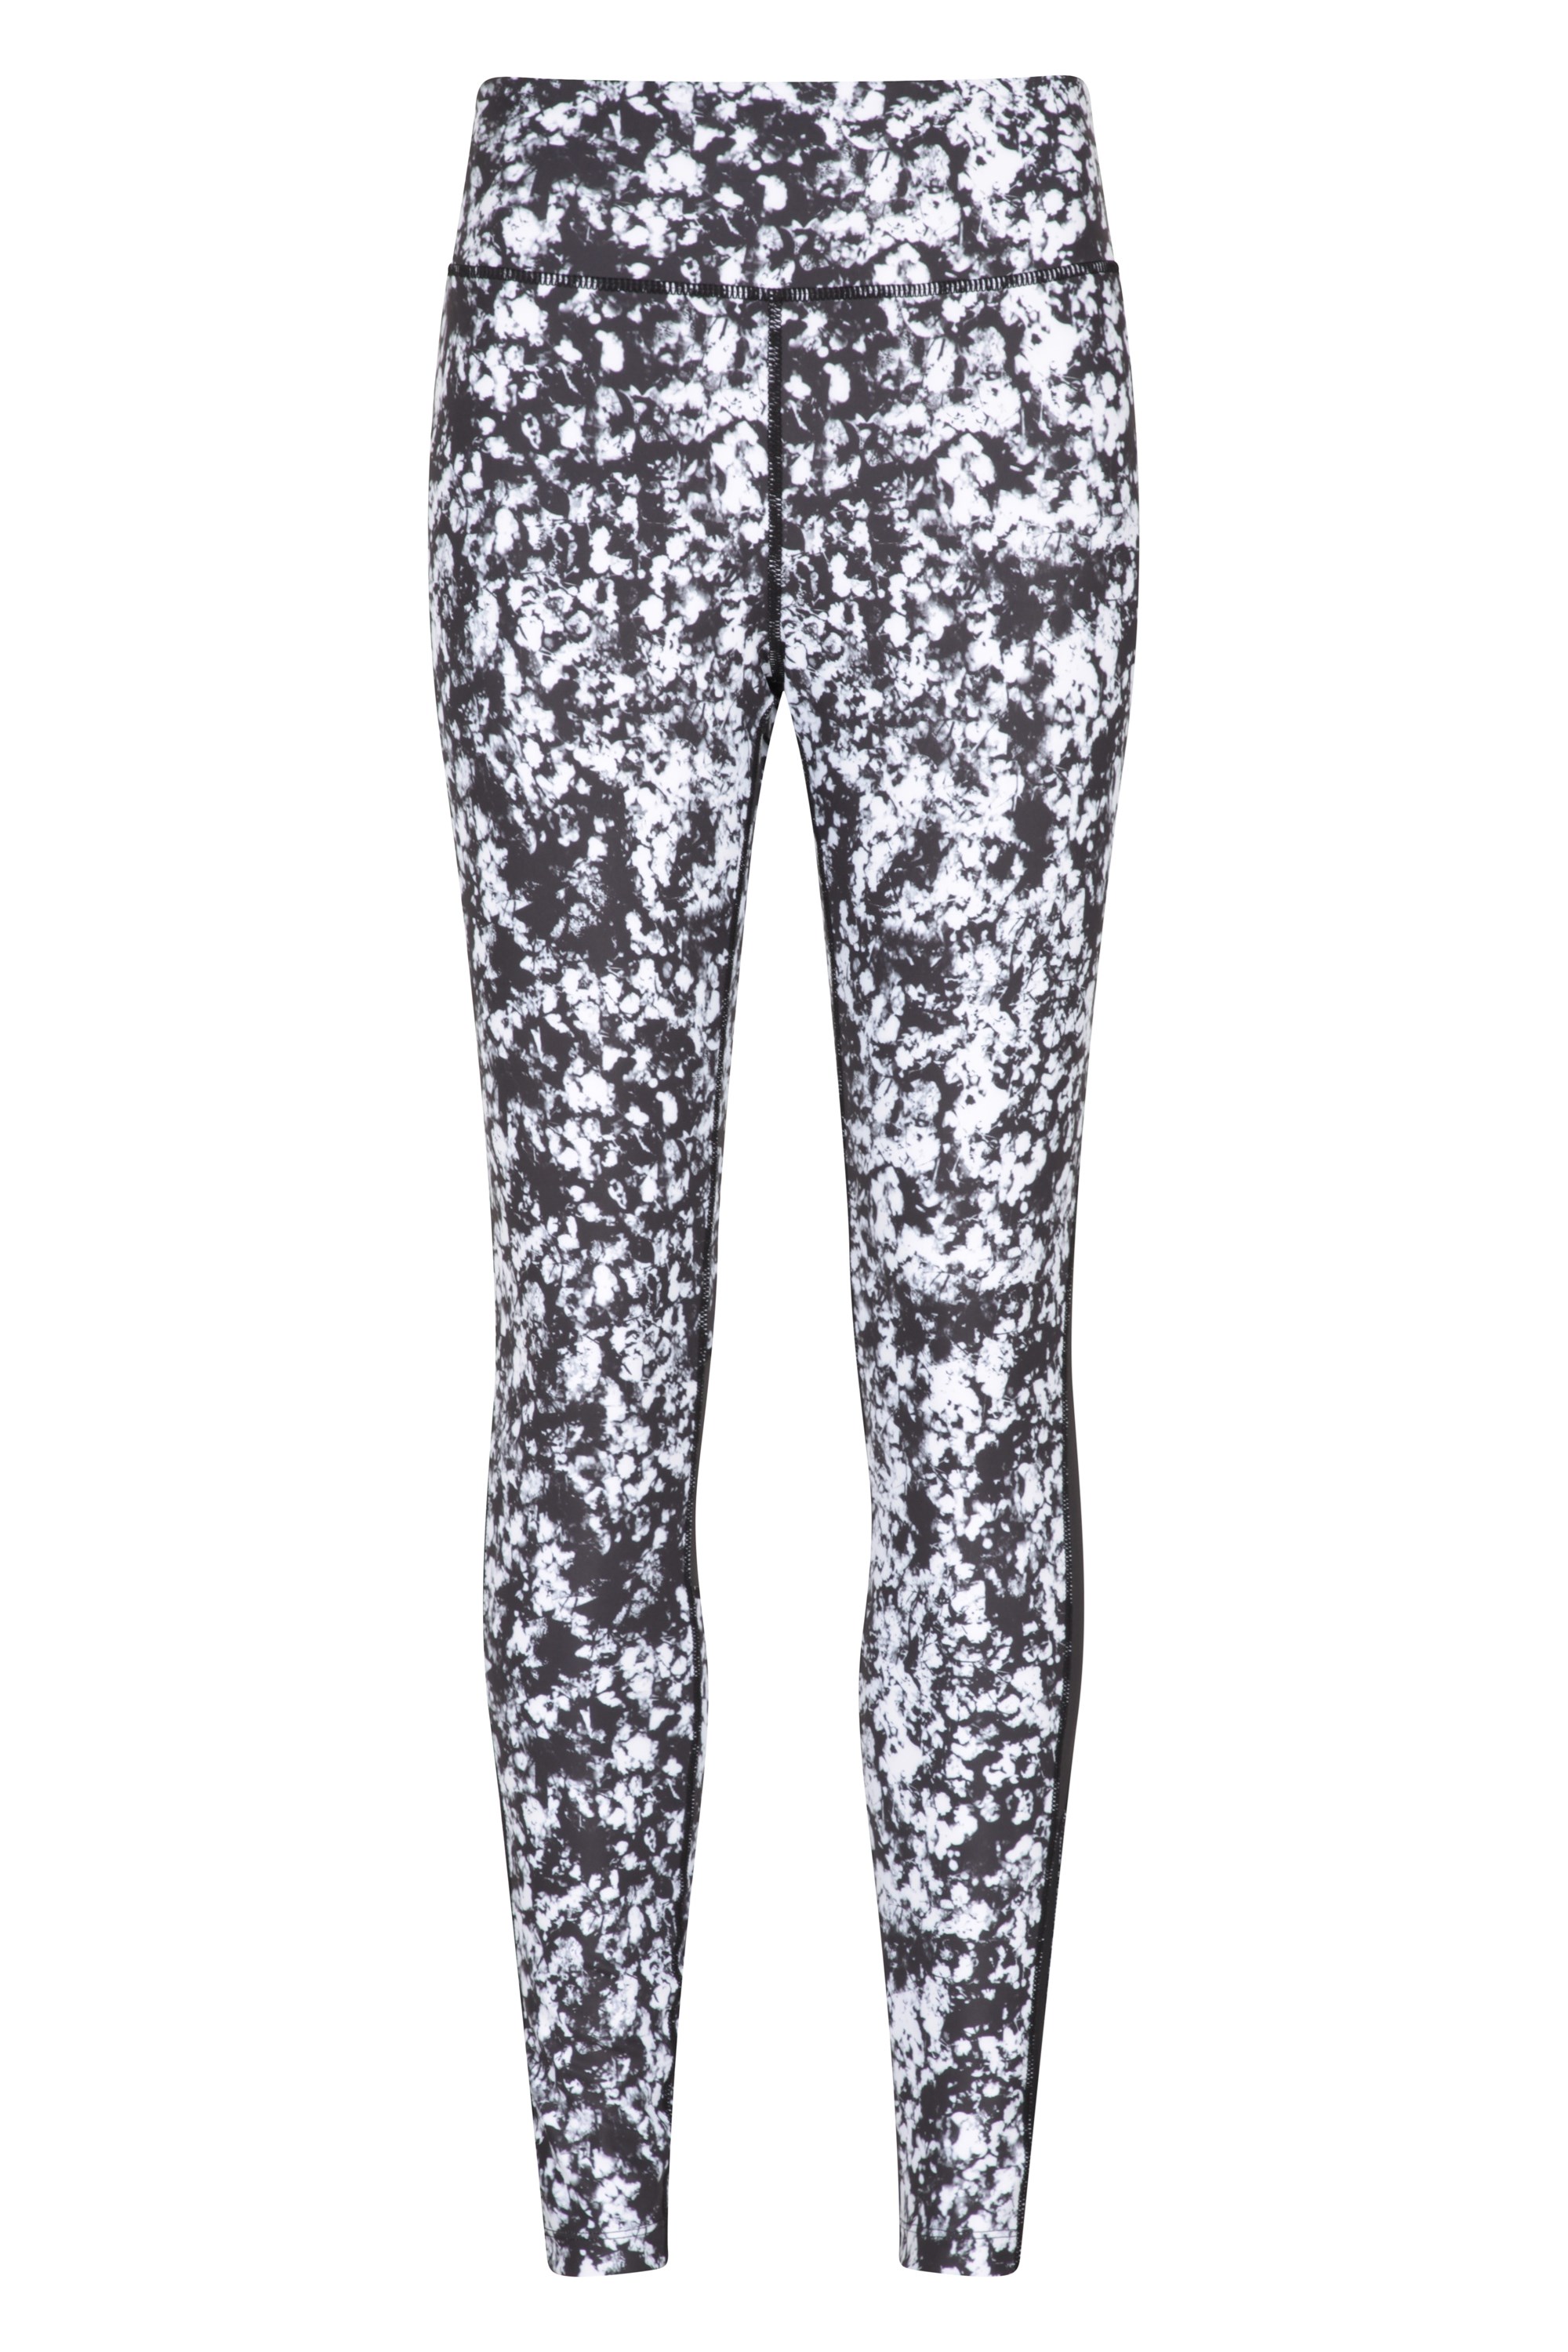 Track Record Womens Patterned Leggings